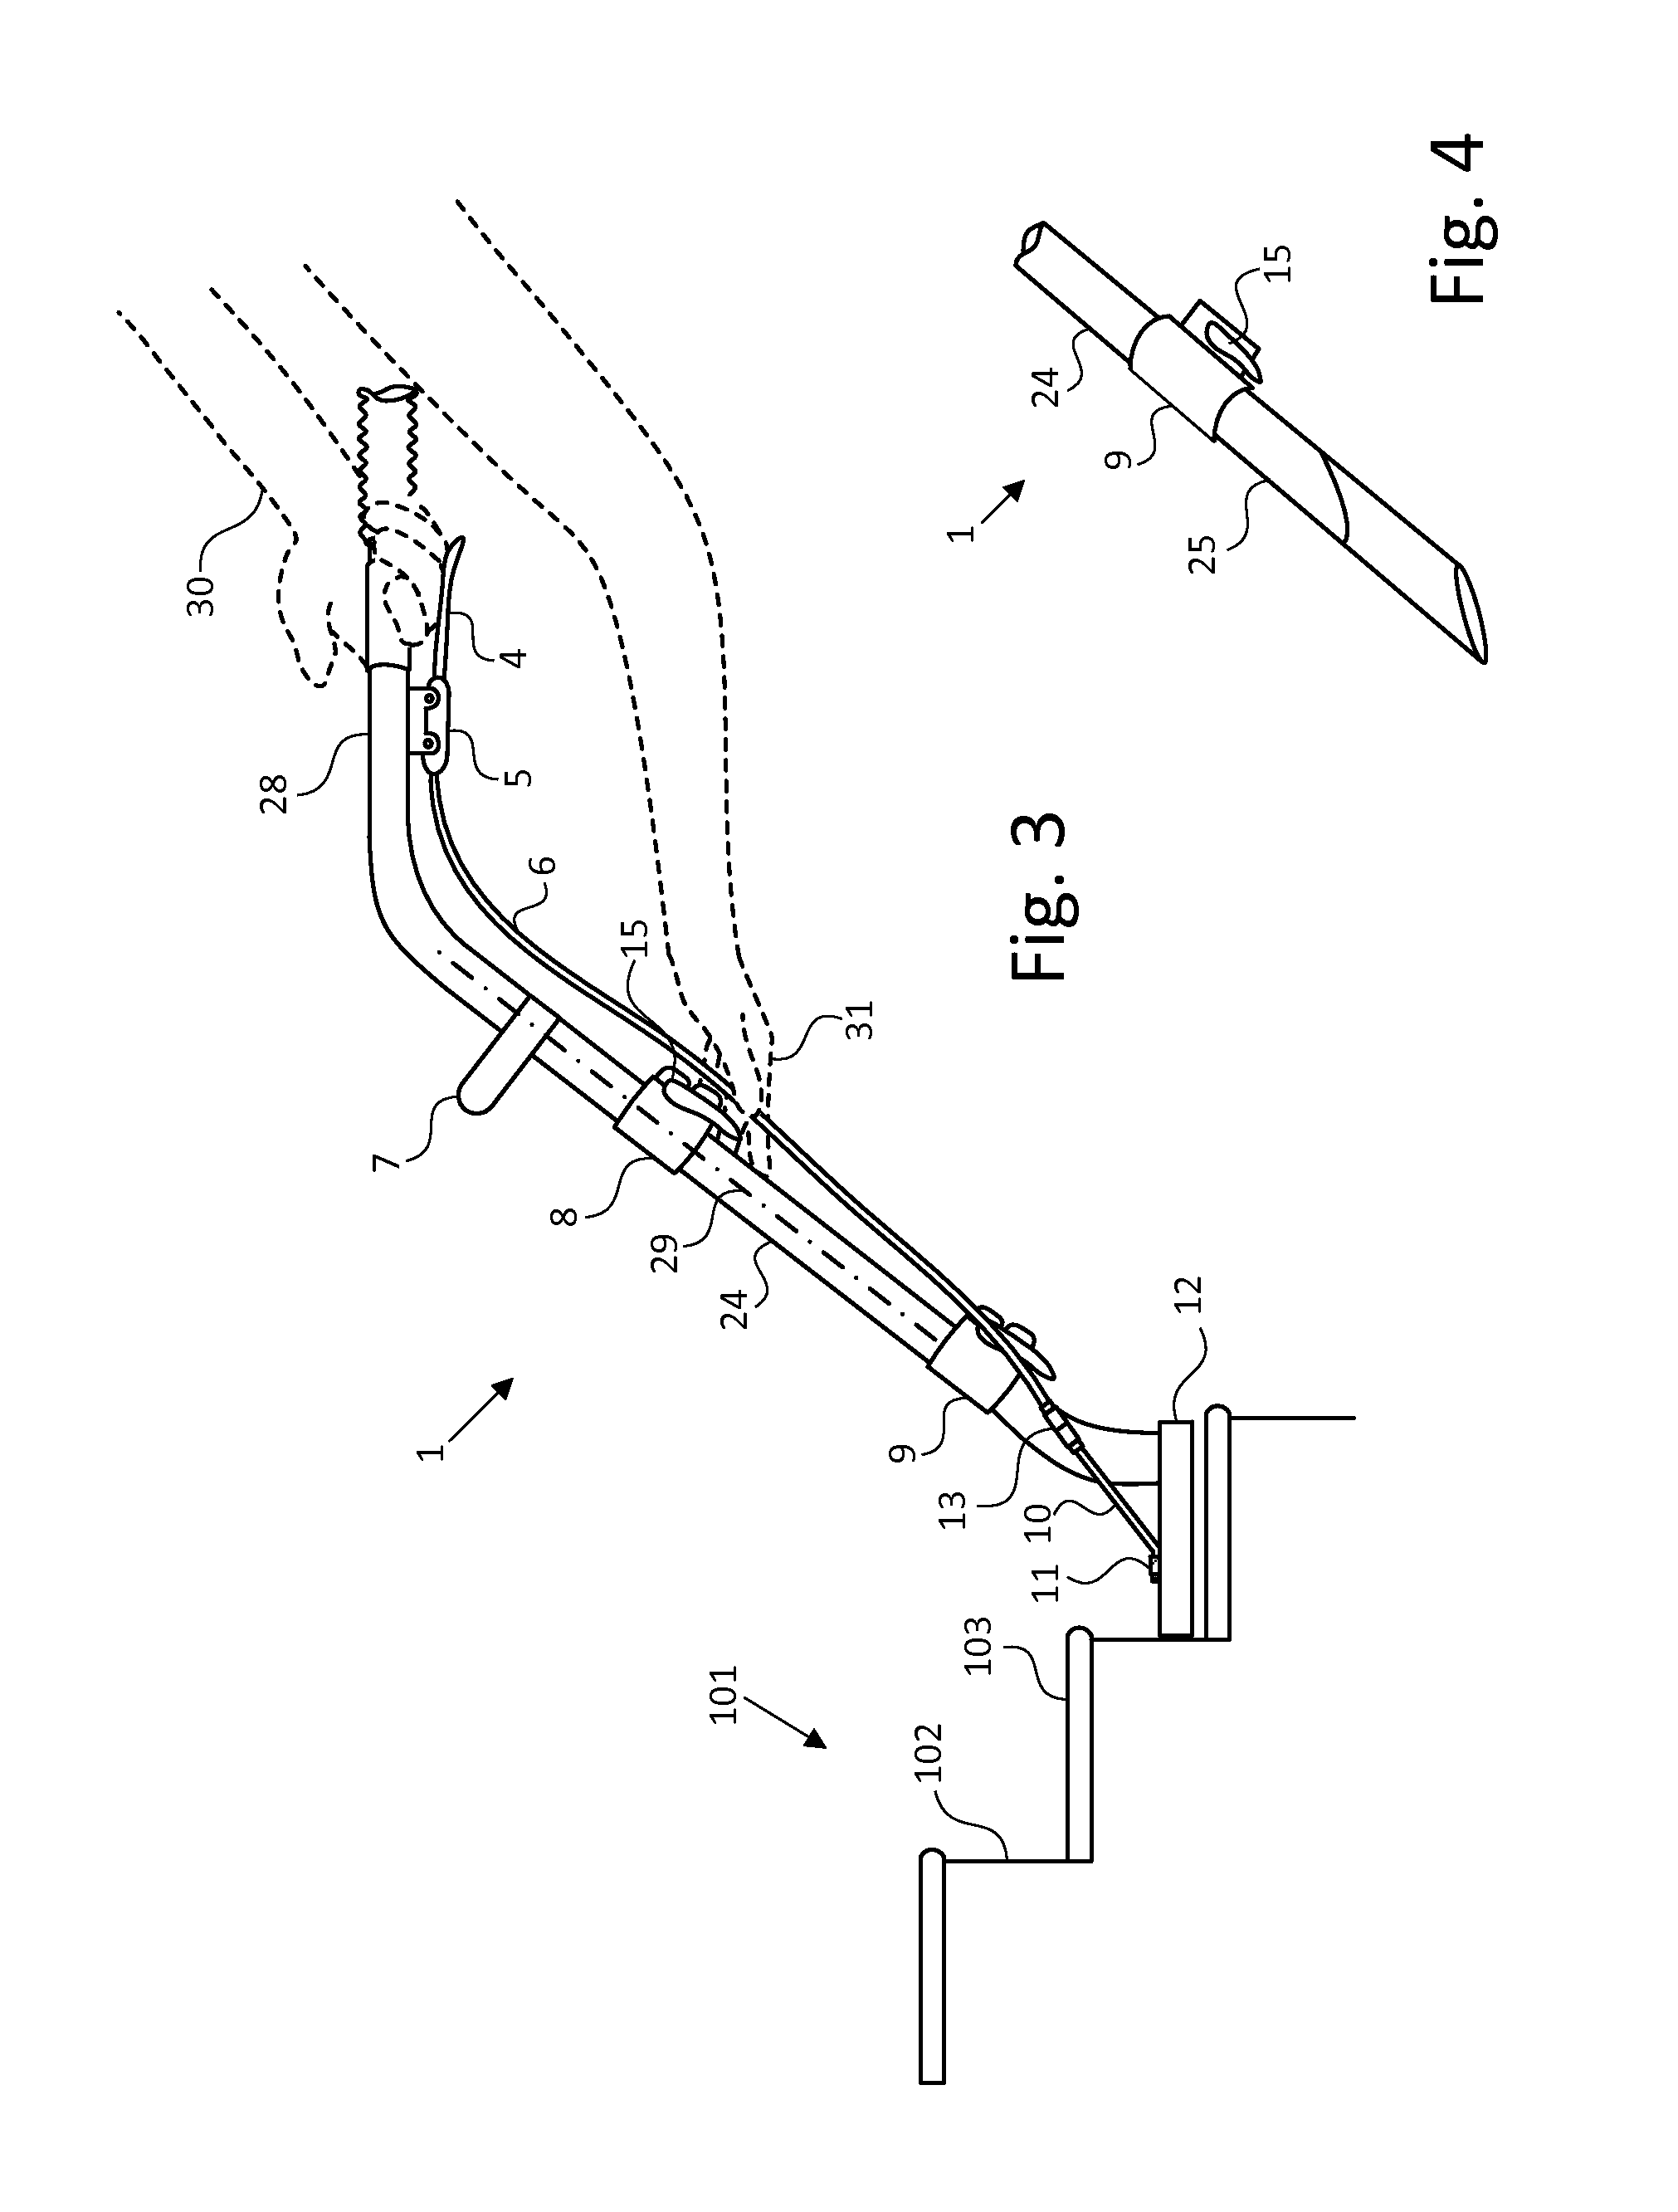 Adjustable wand for cleaning apparatus